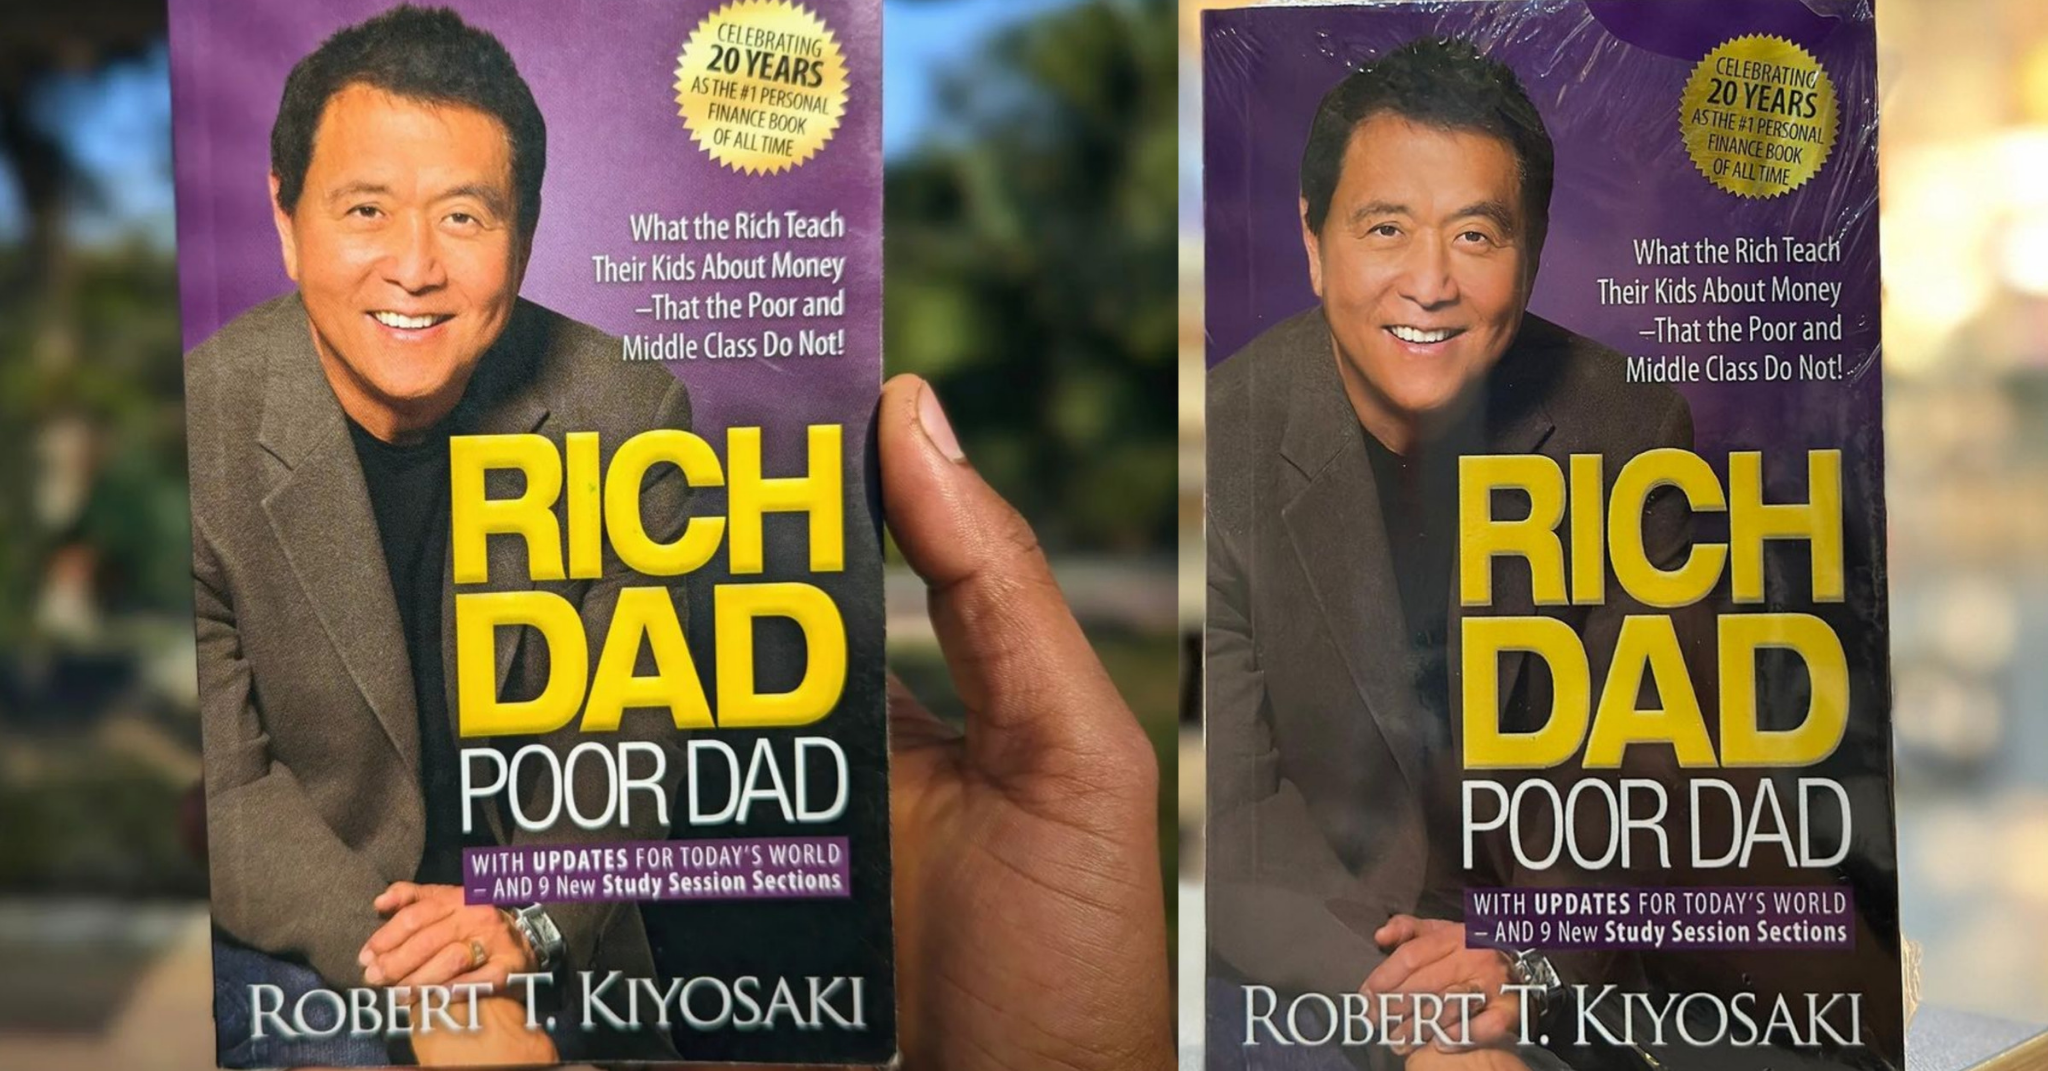 10 key lesson from Rich dad poor.